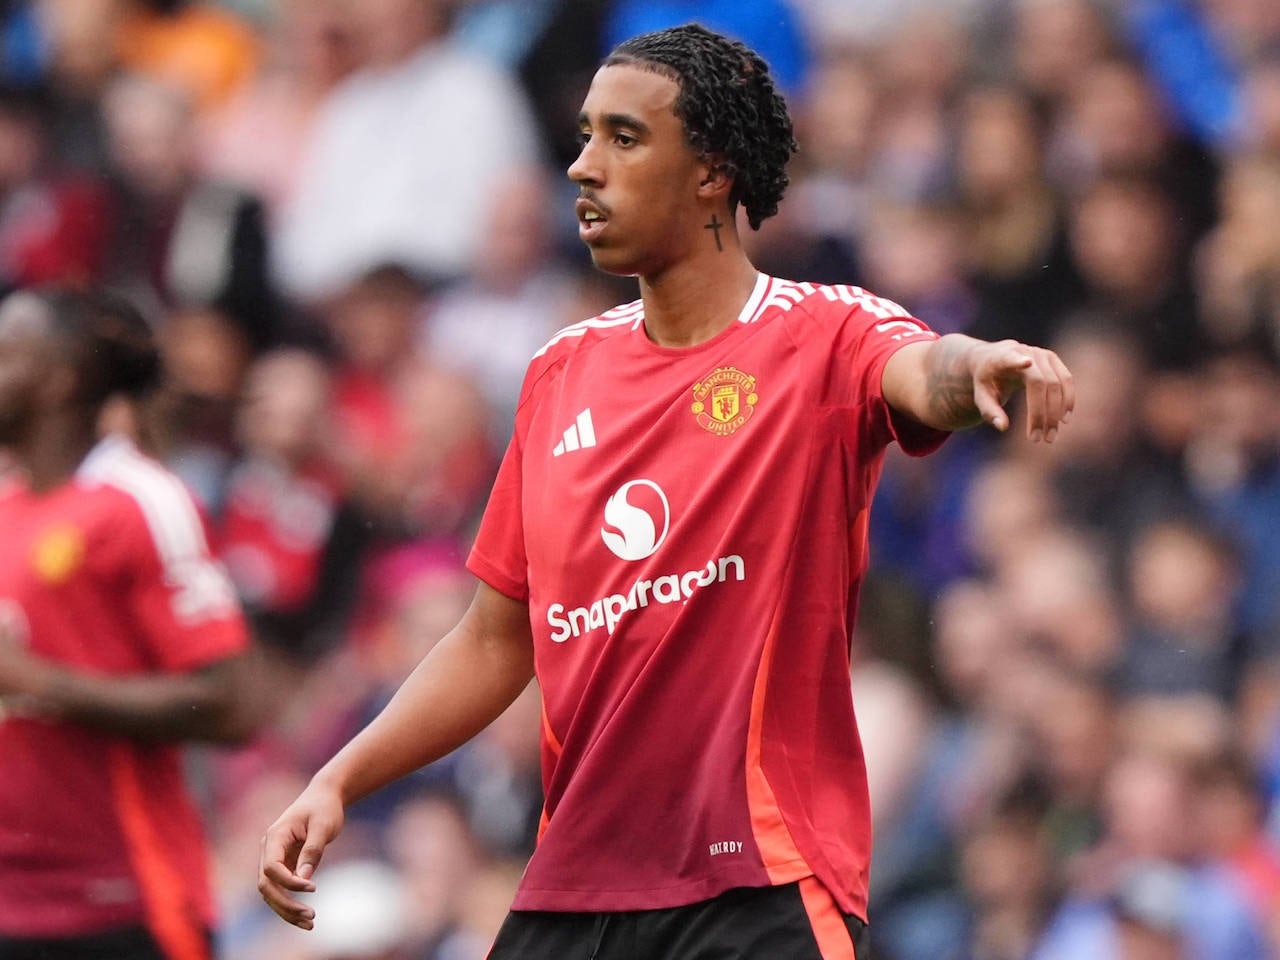 How did Leny Yoro perform on his Manchester United debut against Rangers?